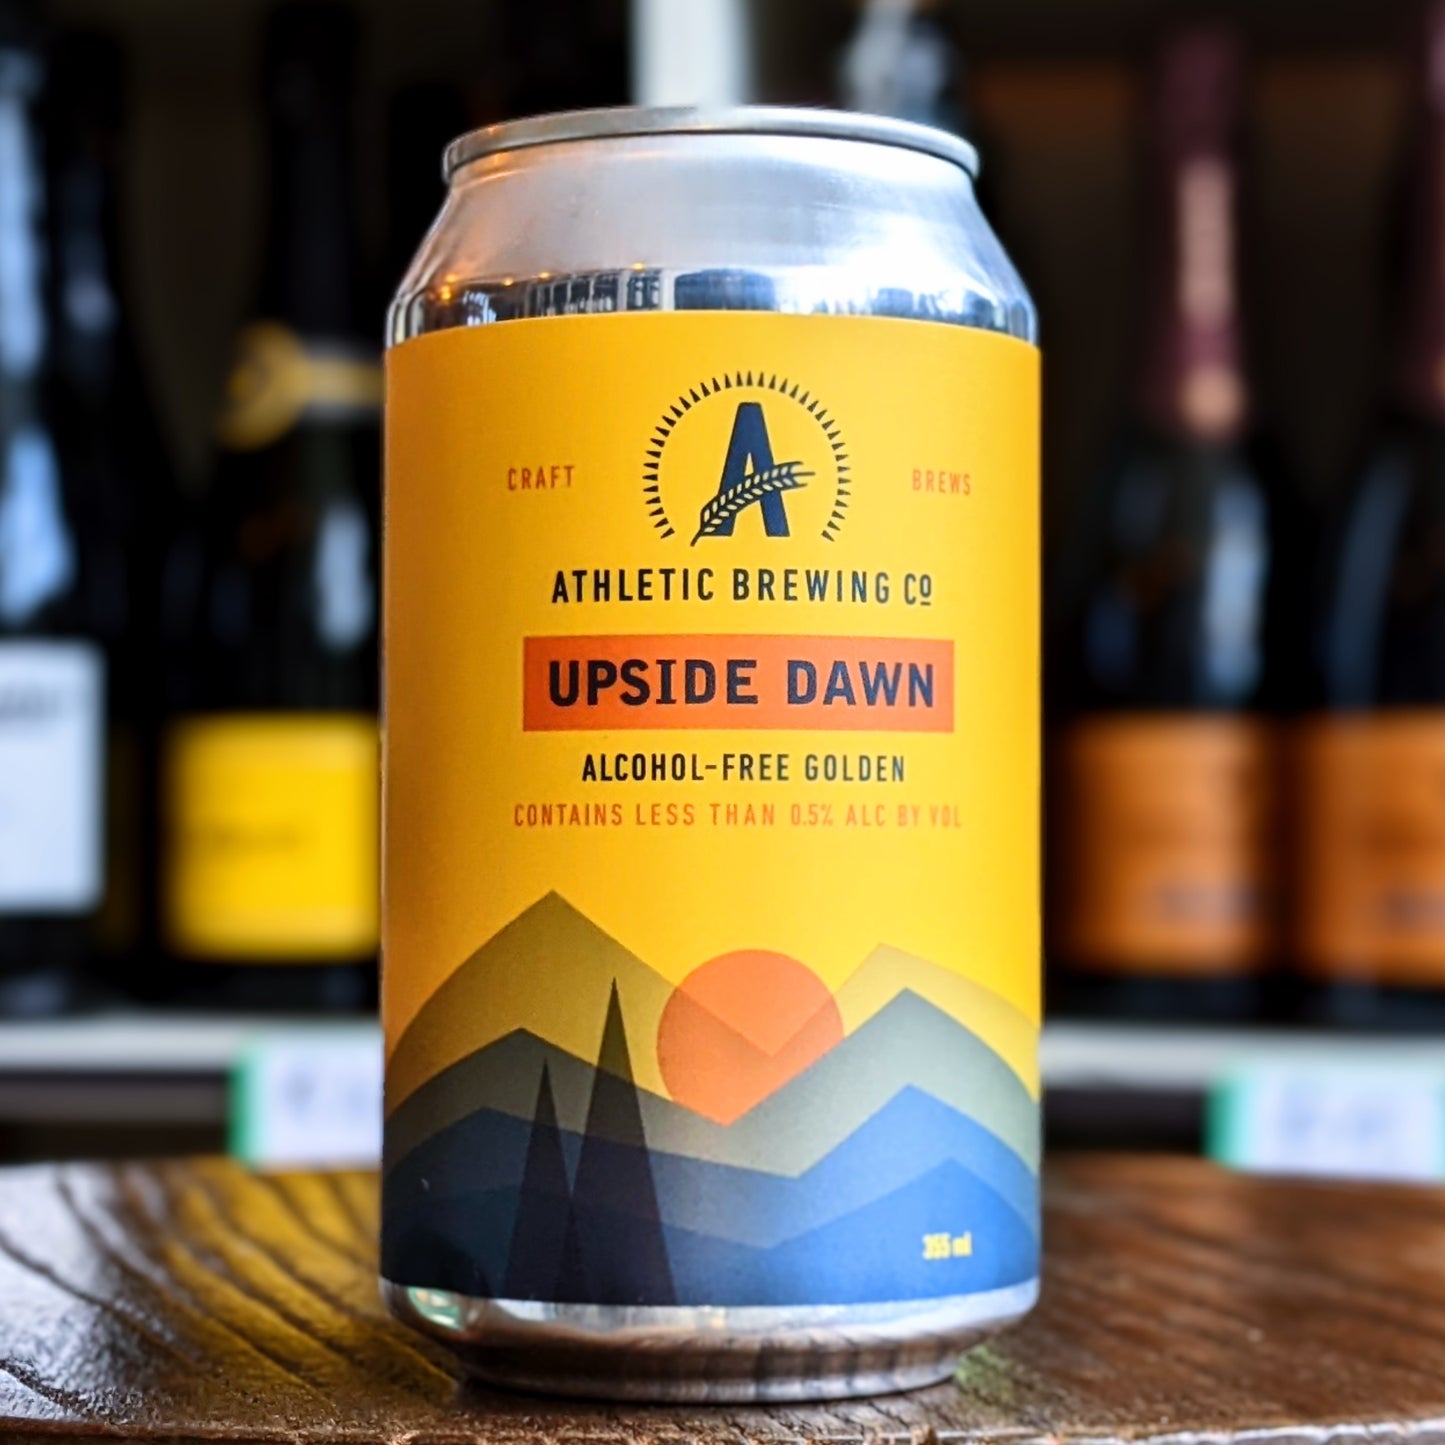 Athletic Brewing Co, 'Upside Dawn' Golden Ale (Alcohol Free), Mondo, Battersea, London (330ml Can)